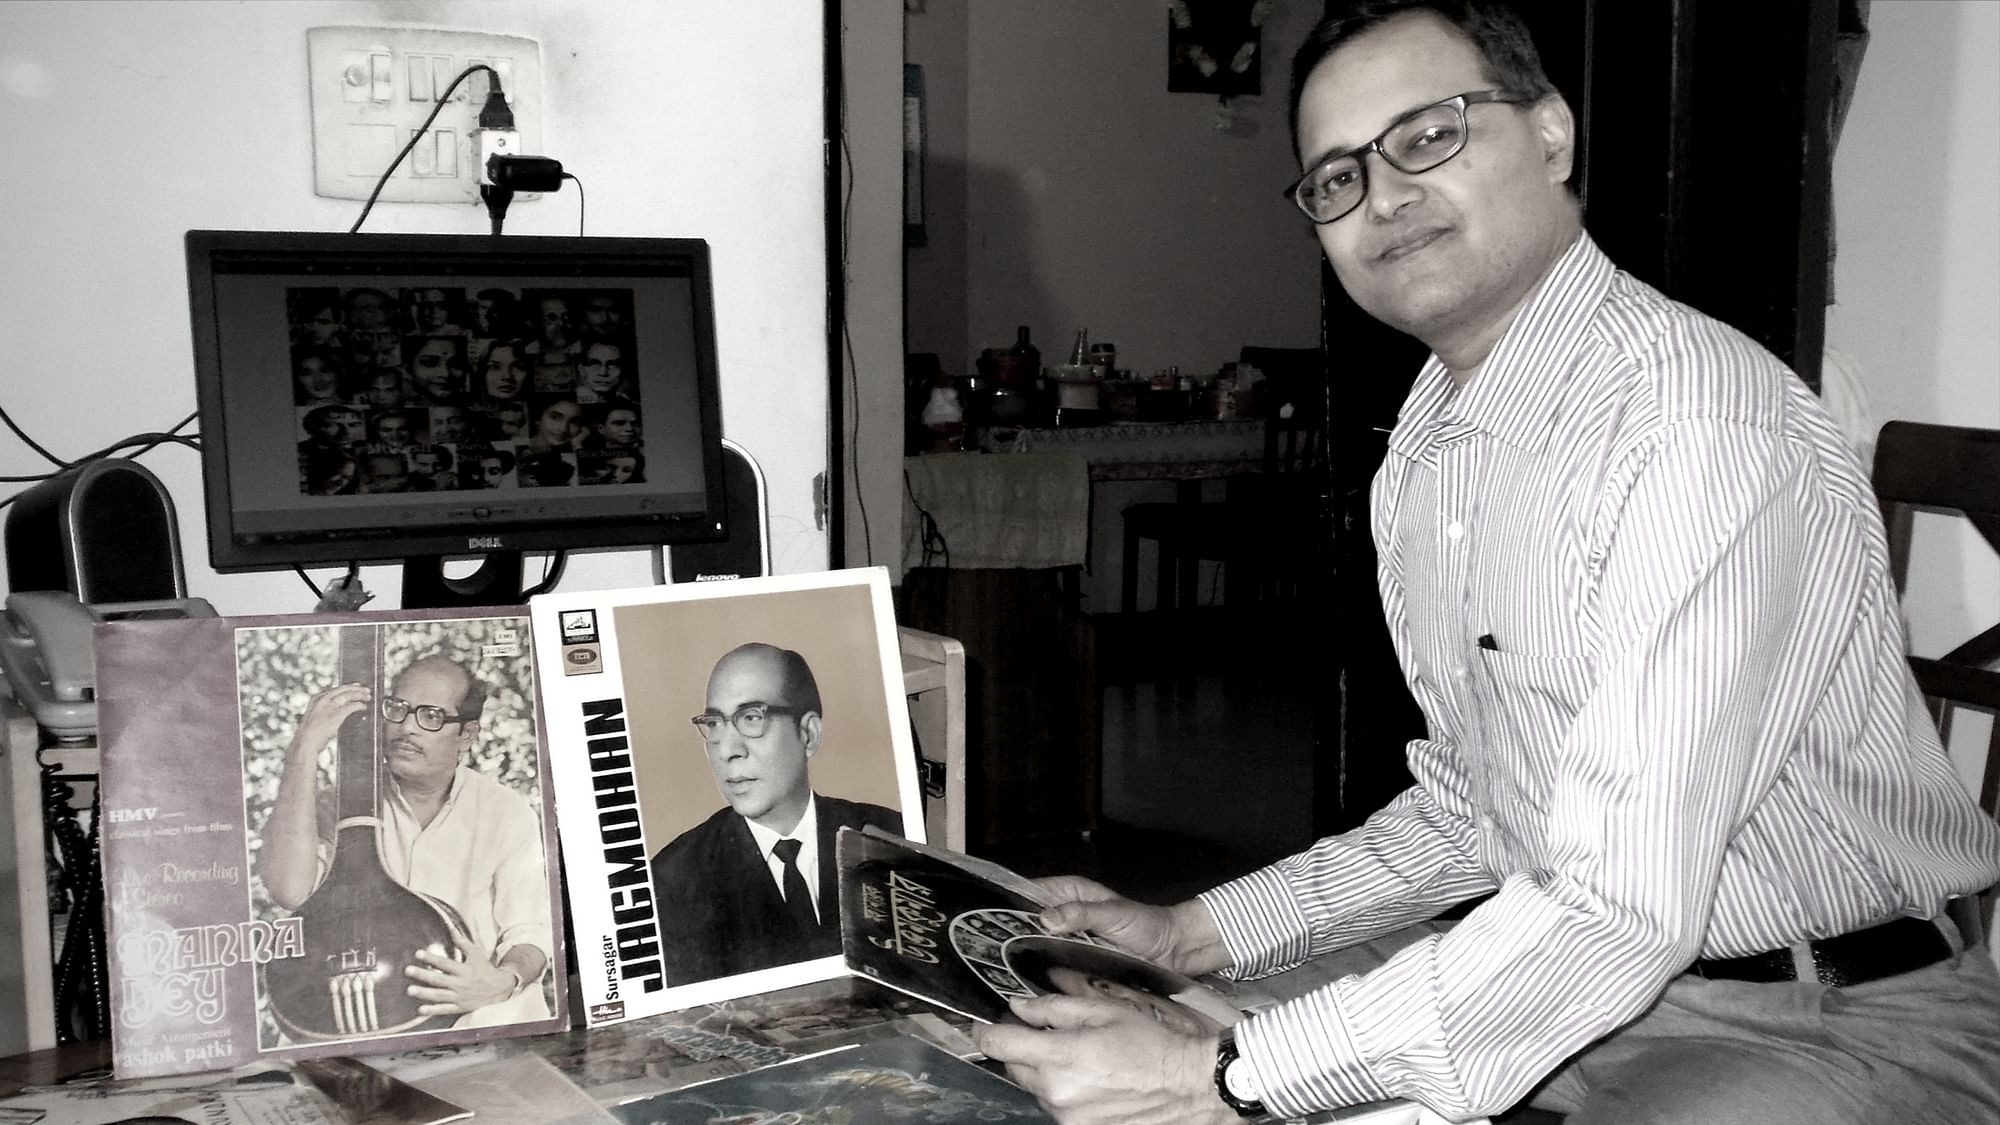 New Delhi’s Moloy Ghosh goes about preserving India’s musical past, one record at a time. (Photo Courtesy: Moloy Ghosh)